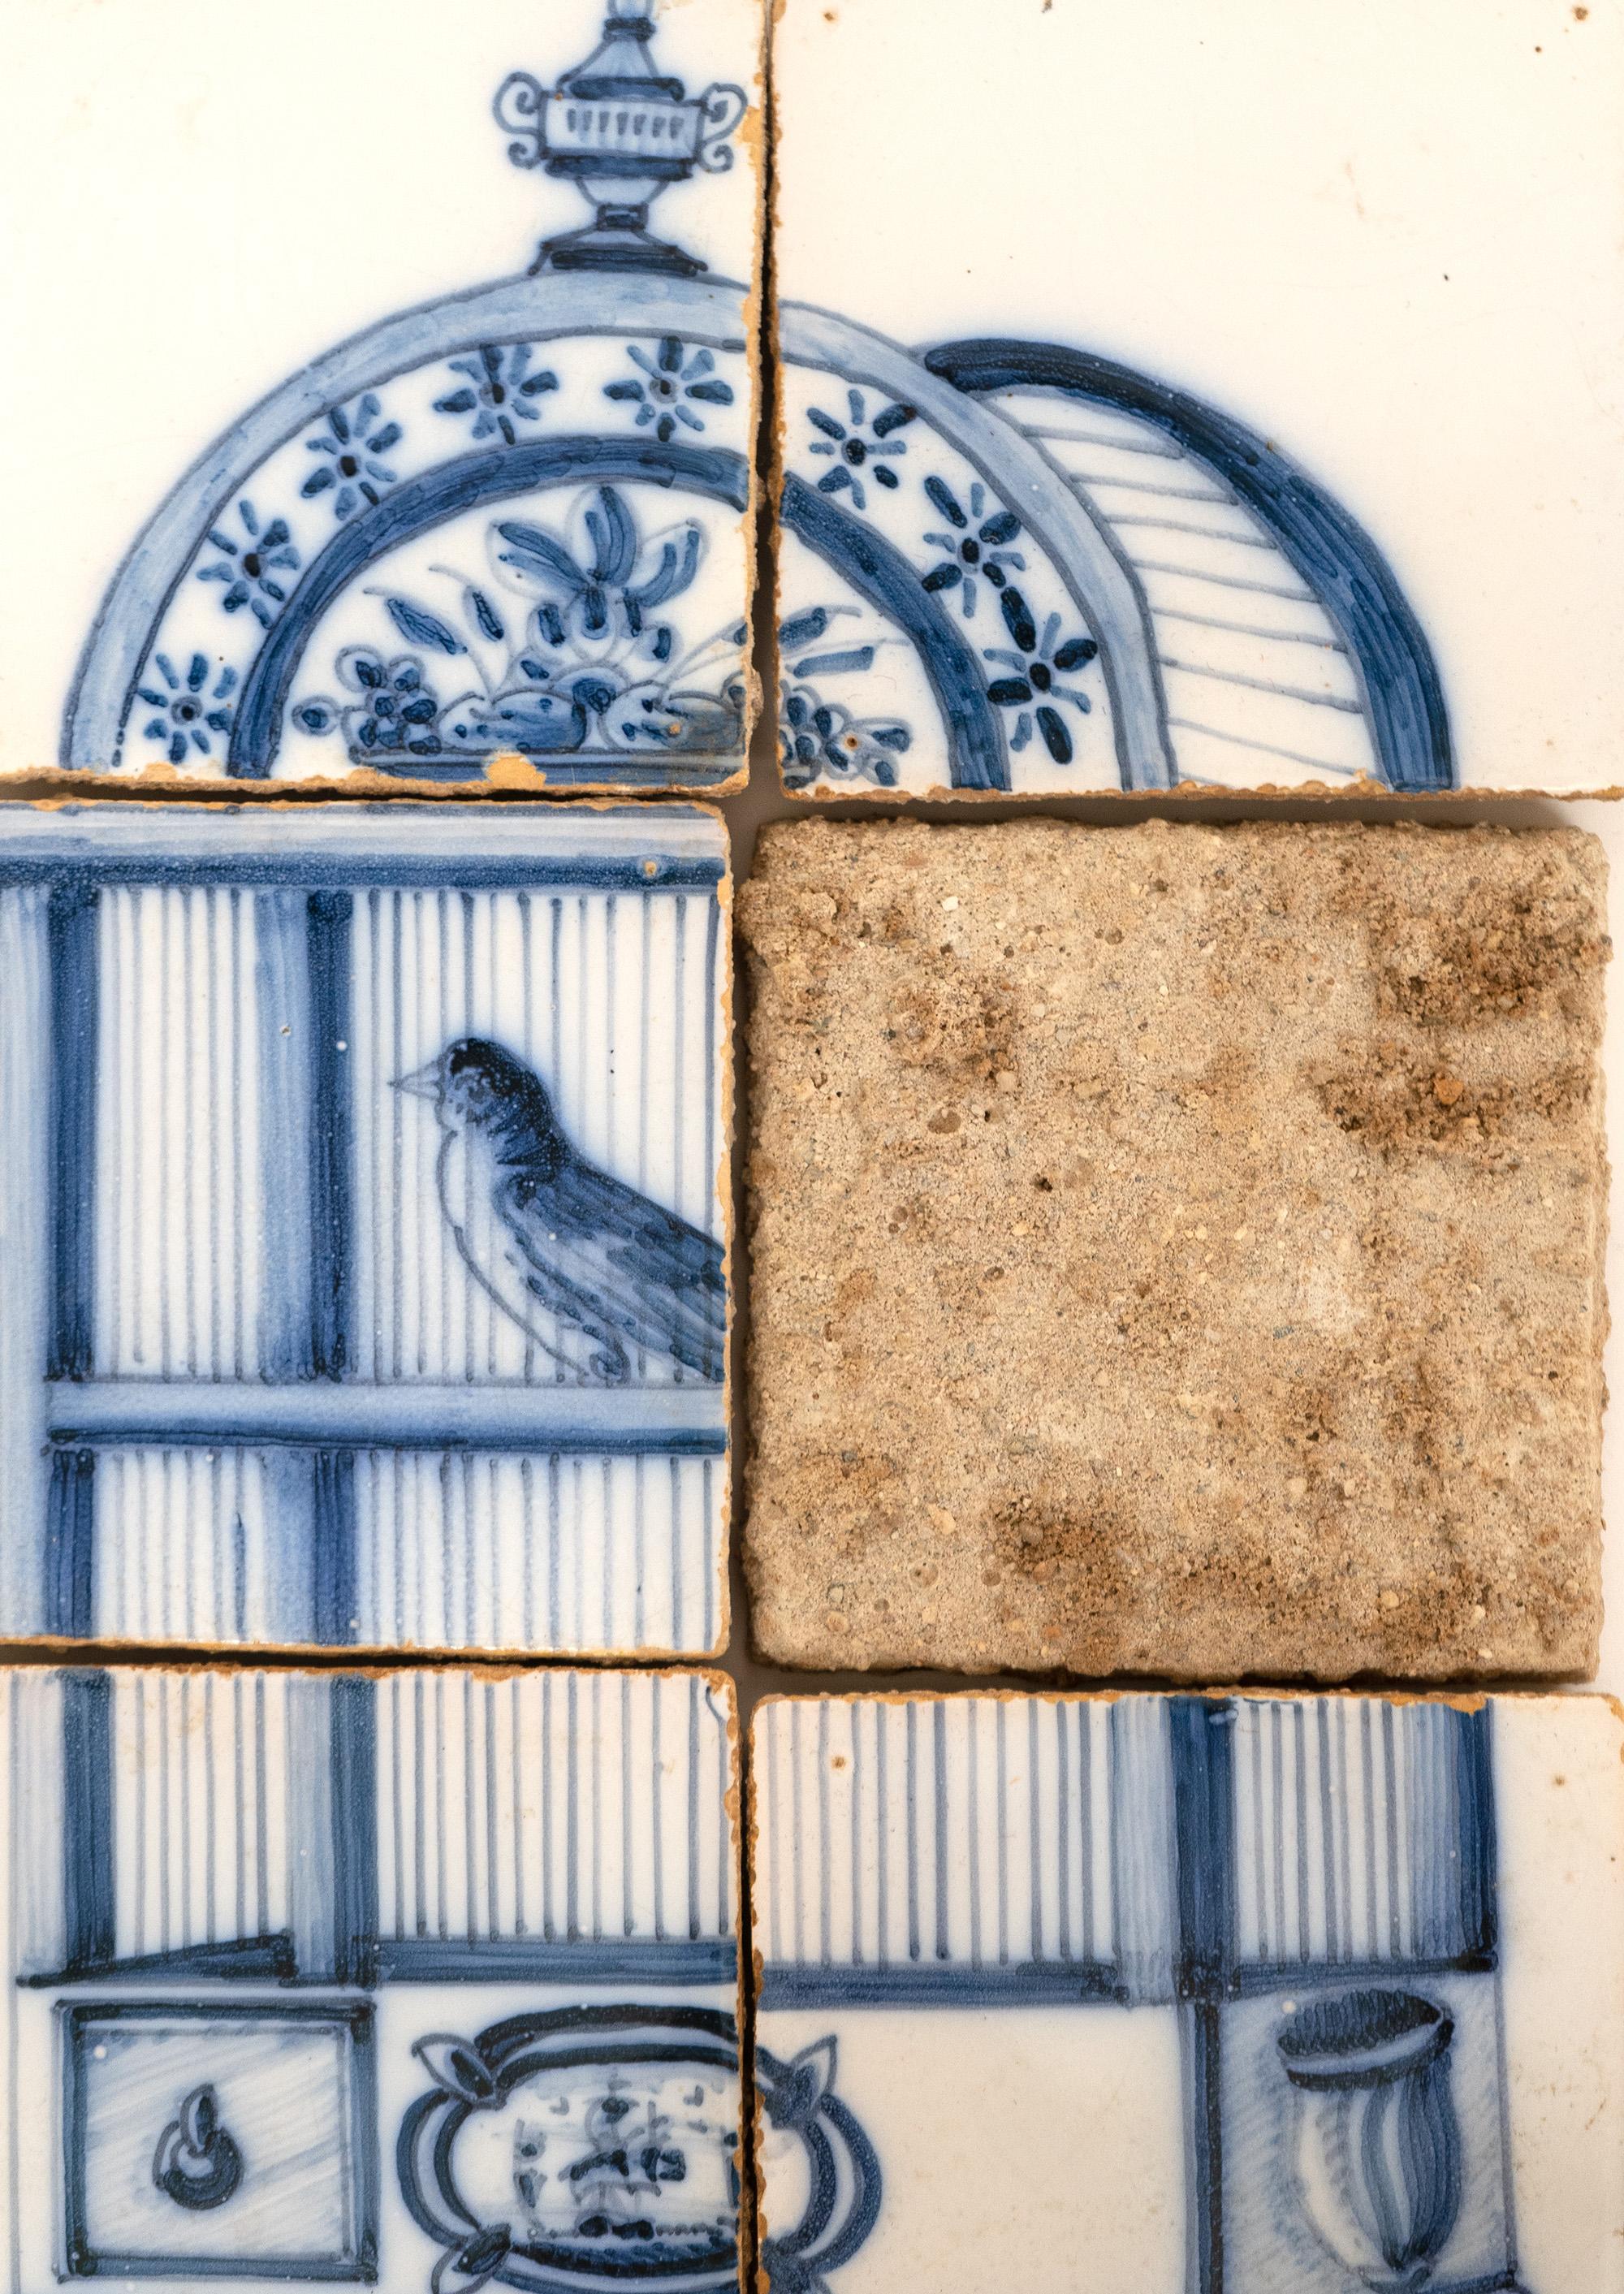 Blue and white set of 6 Delft ceramic tiles.

15.25 x 10 in.